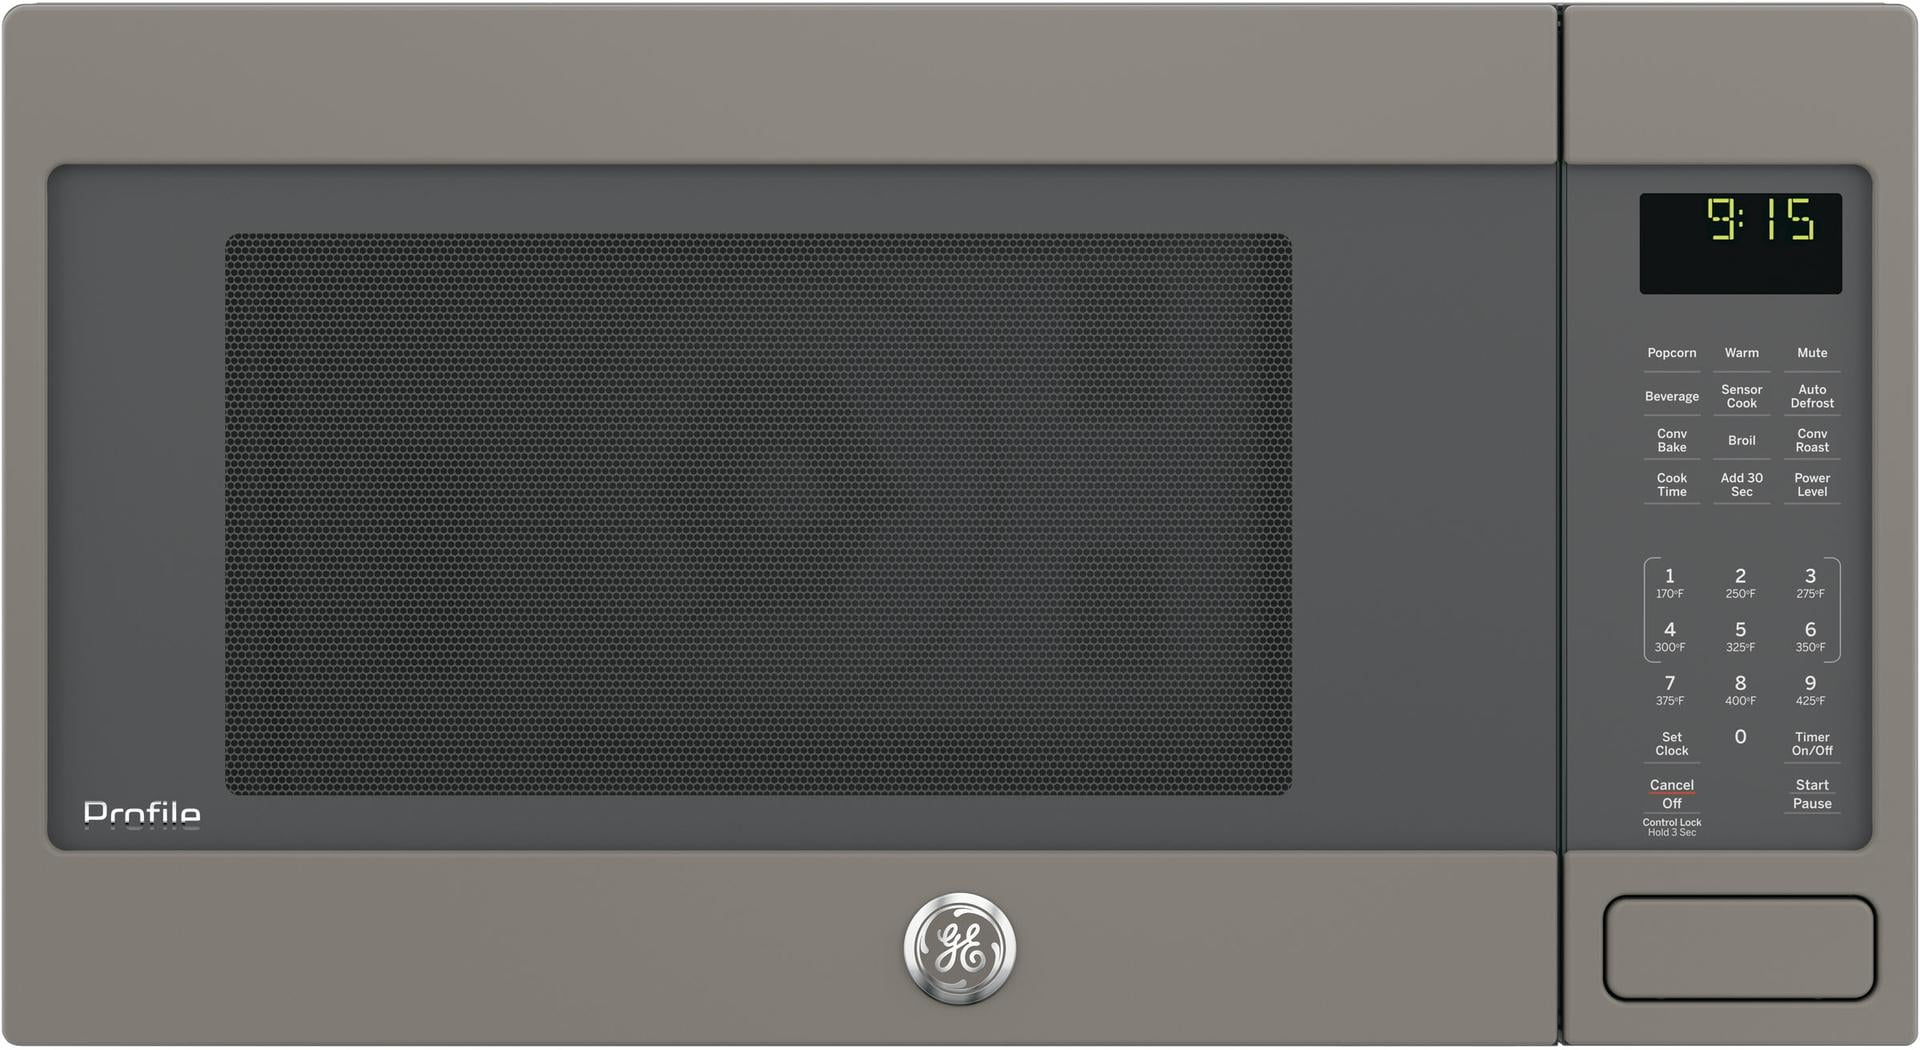 PEB9159EJES 22 Countertop Convection/Microwave Oven with 1.5 cu. ft